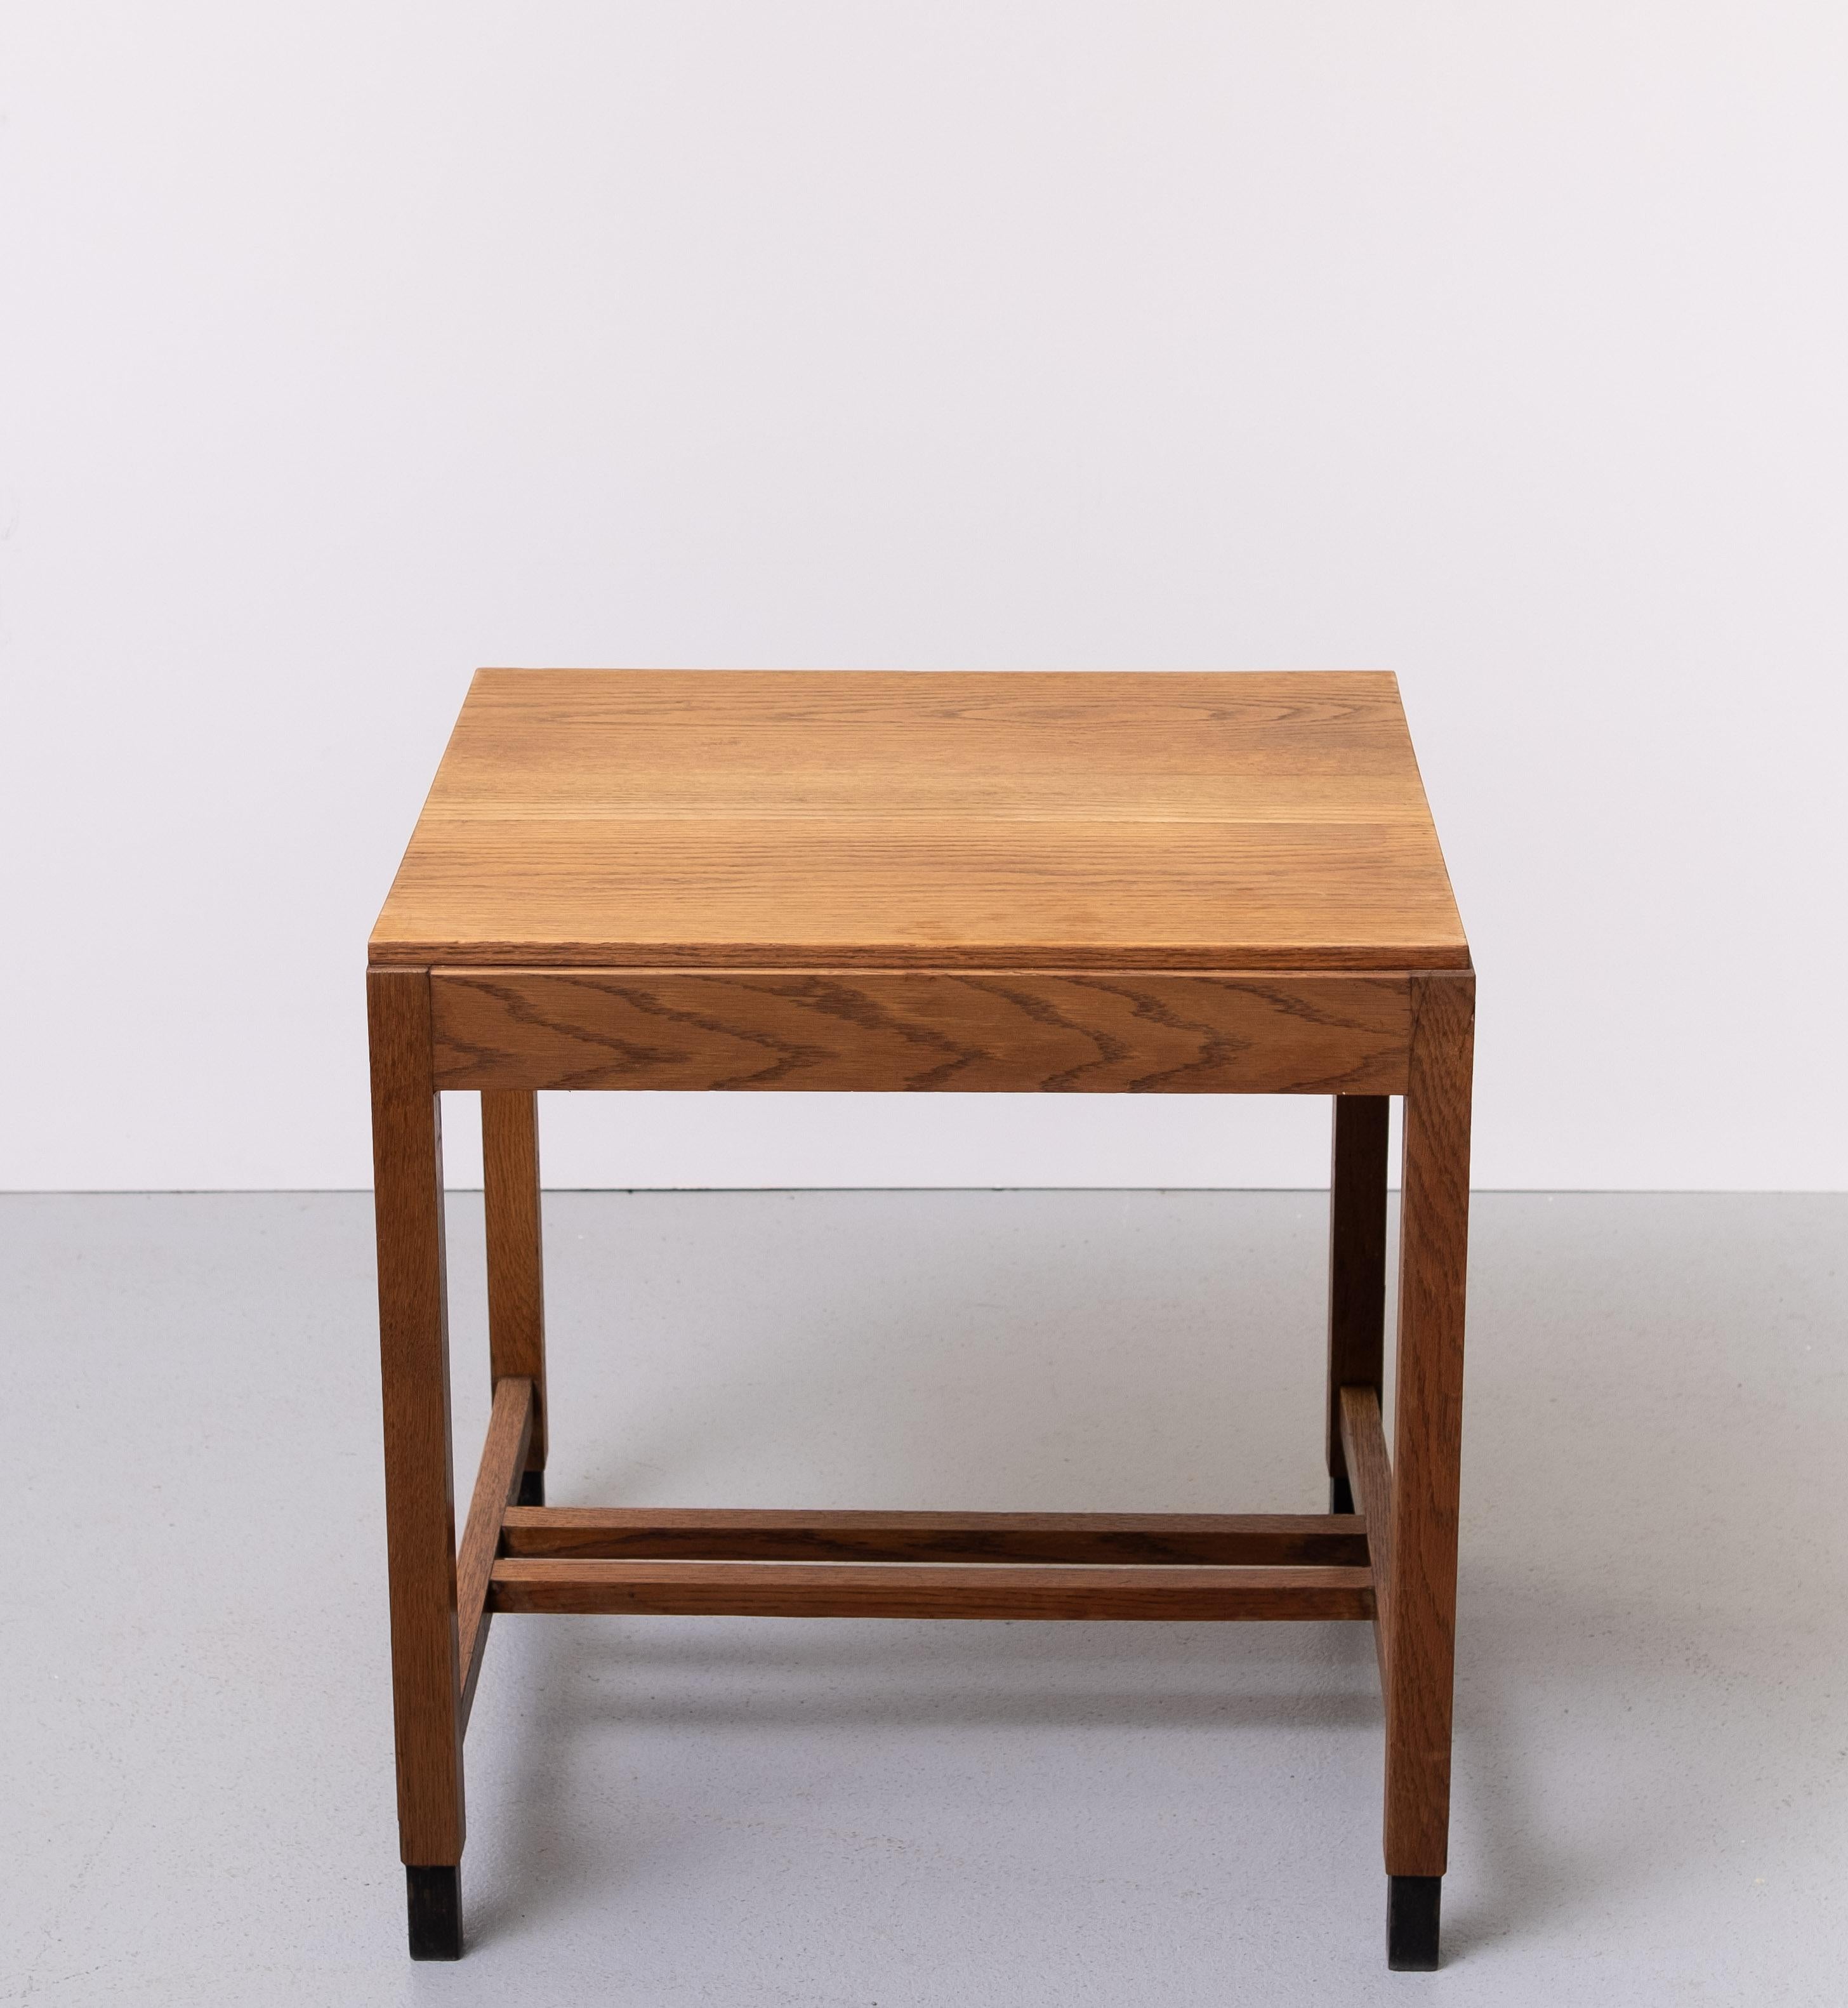 Very nice solid Oak side table or writing table or dining table 
Typical Amsterdam School style .  Minimalist and sleek design.